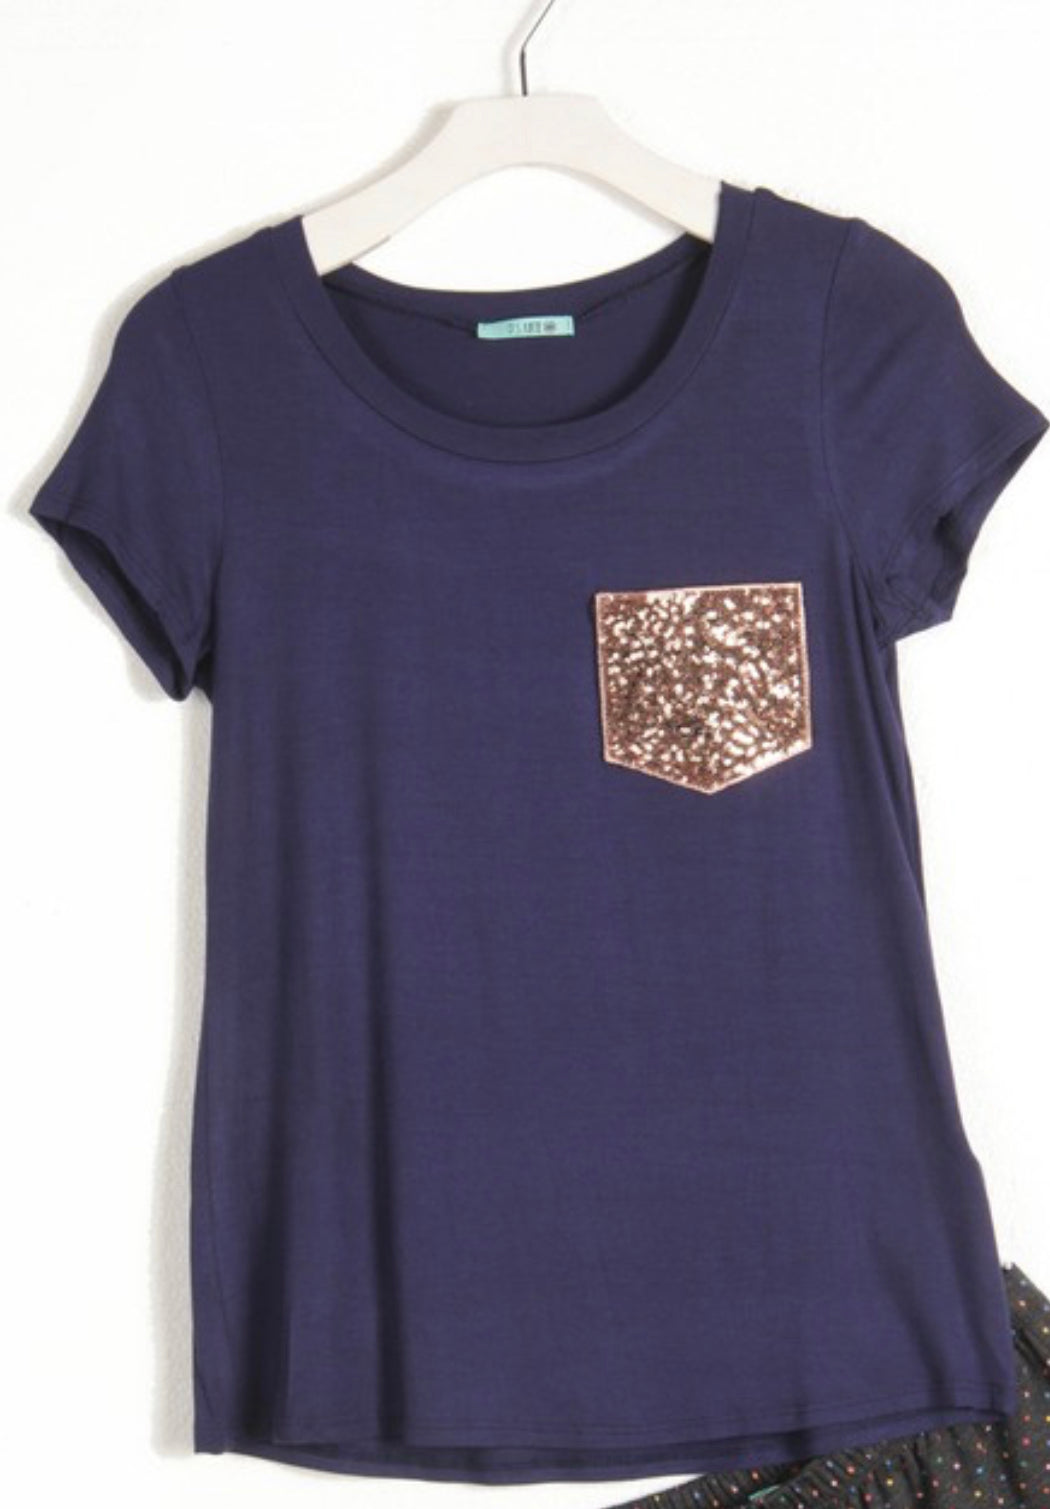 PS KATE- Solid SS Top w/ Sequin Pocket